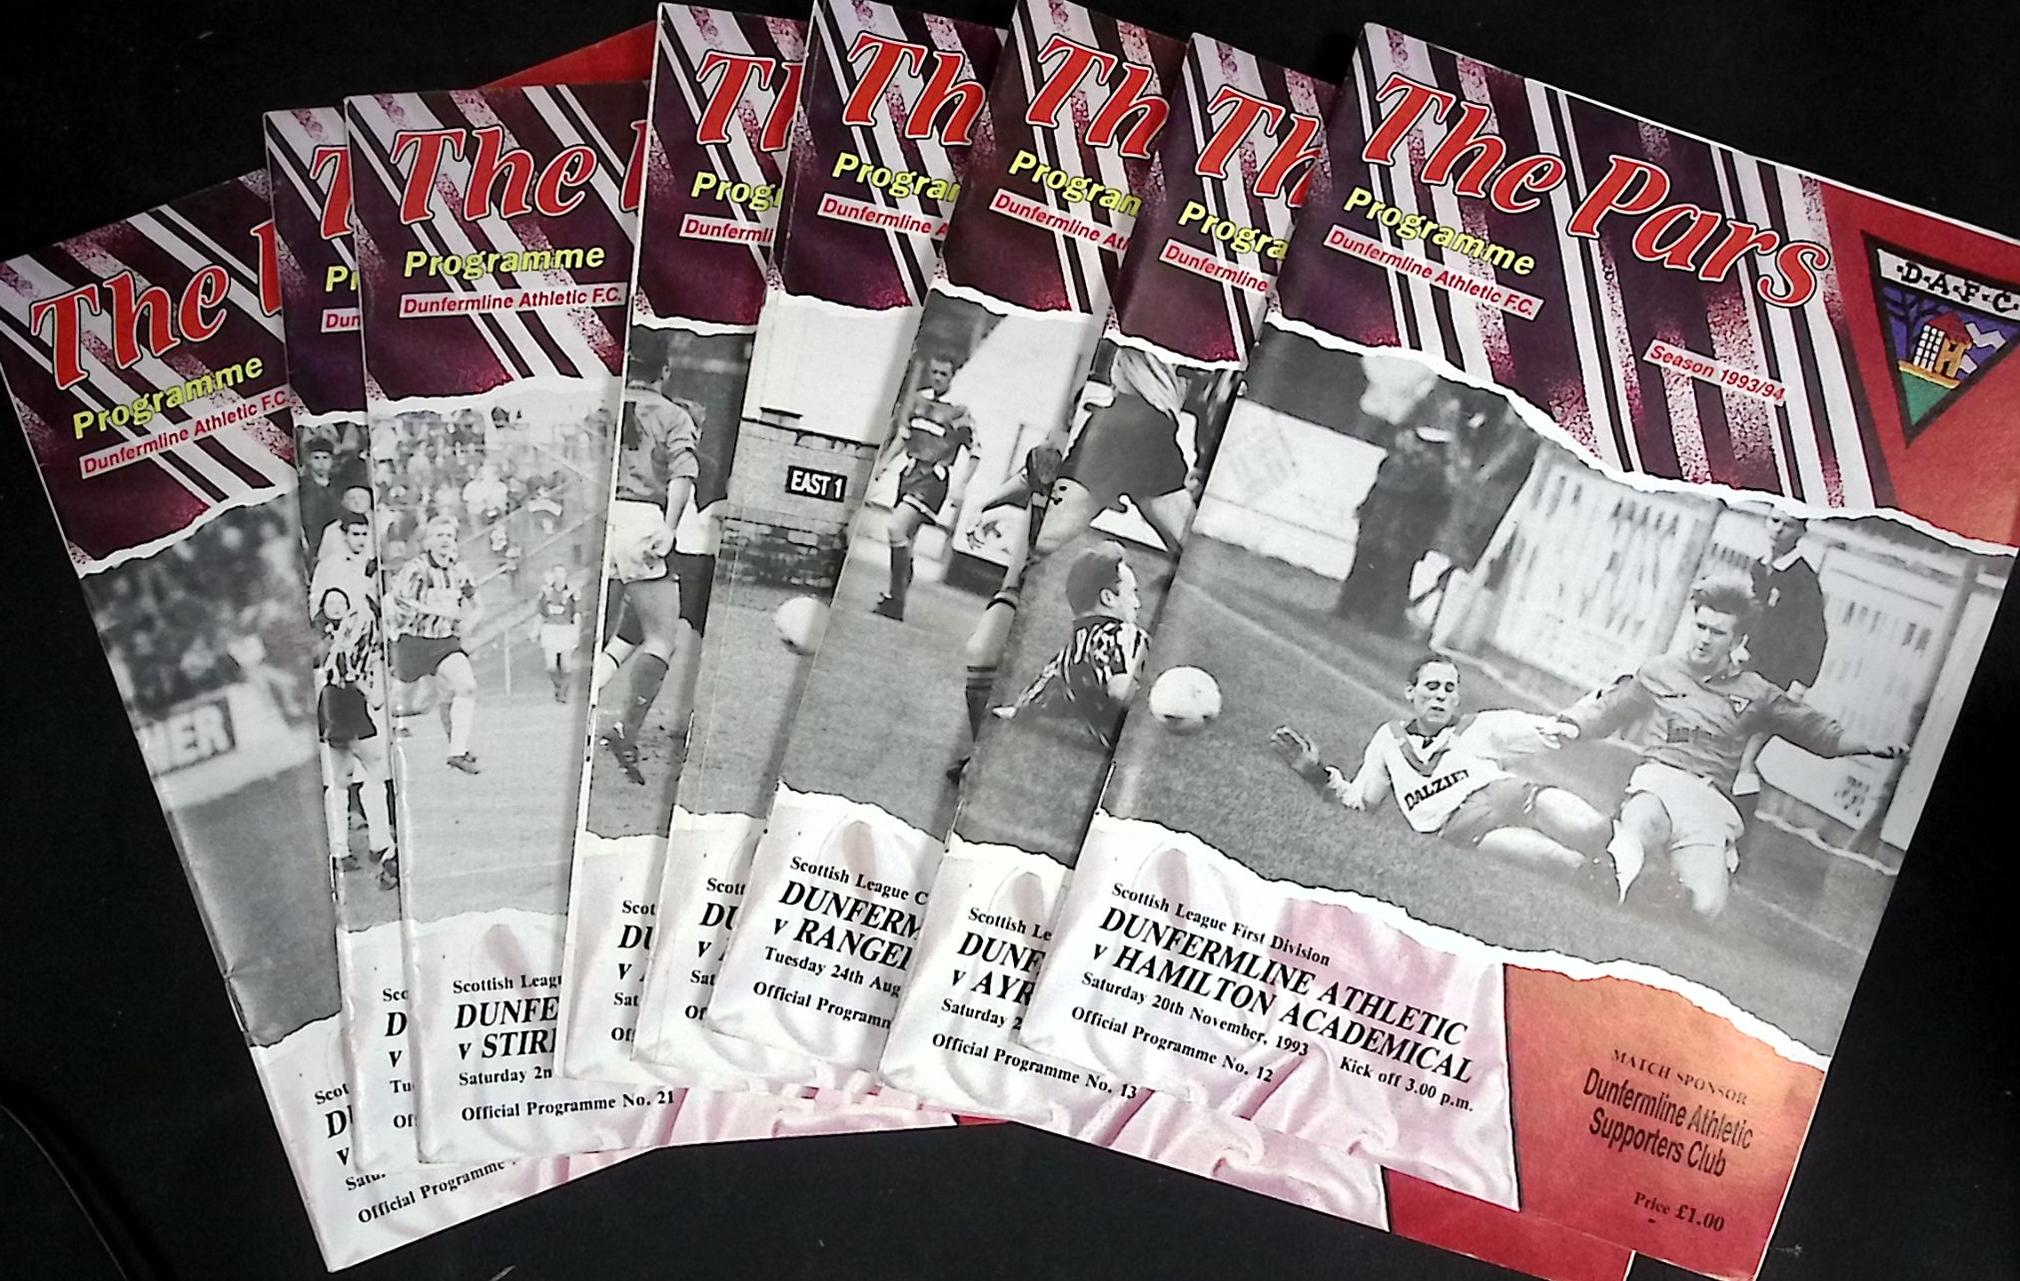 Dunfermline Athletic Football Programmes. The Pars. 1993-94 Season.  8 issues.